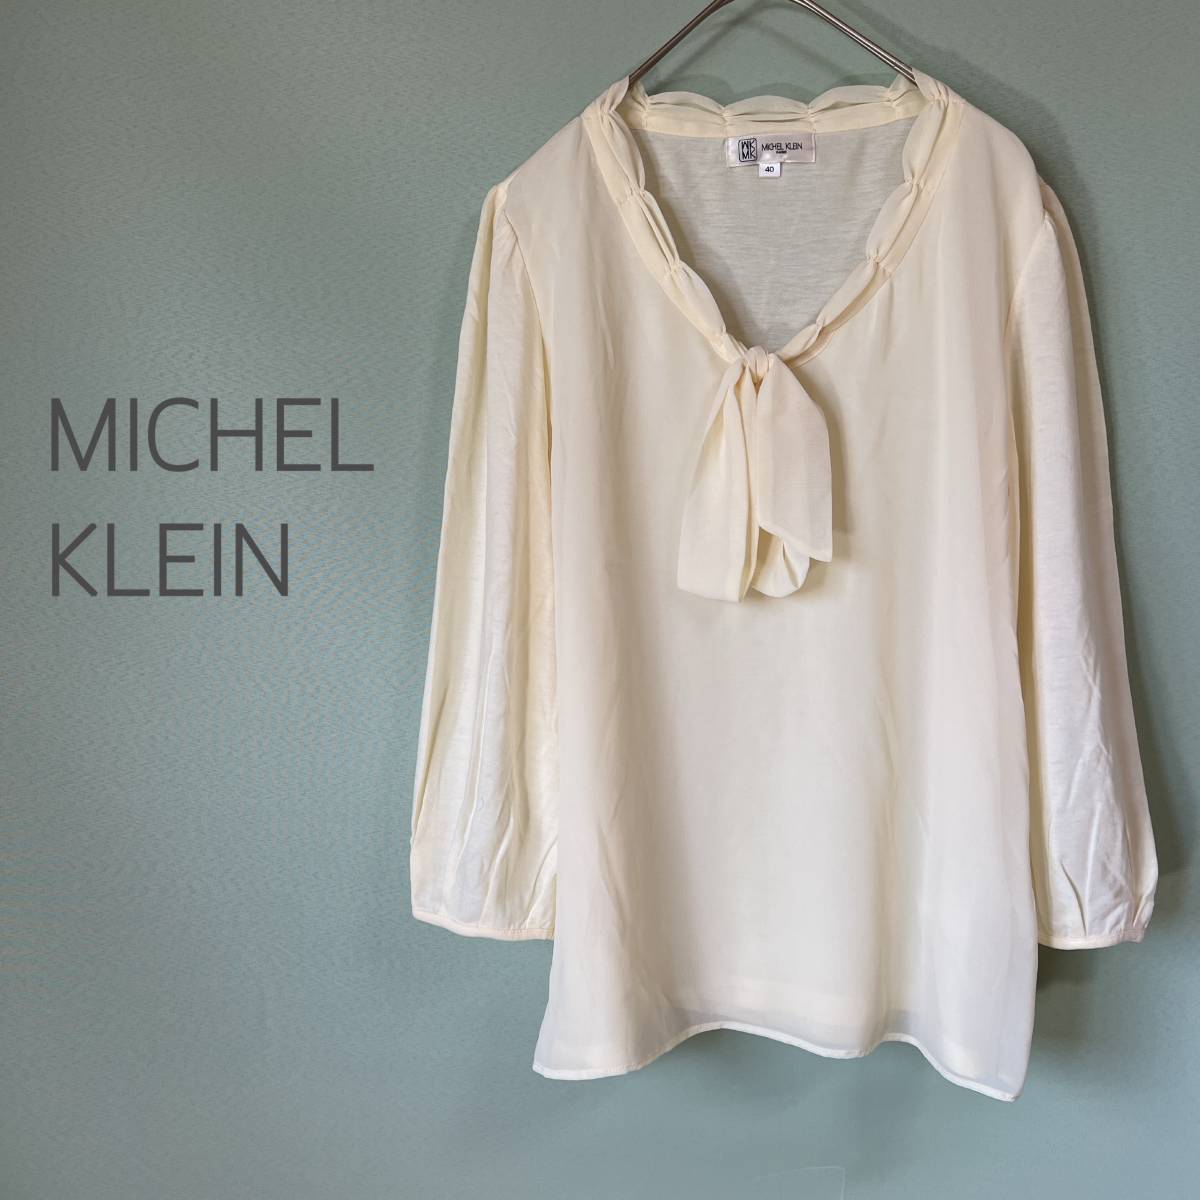 *MICHEL KLEIN Michel Klein cut and sewn 7 minute sleeve cut and sewn ribbon cut and sewn cream color lady's size 40 ceremony 